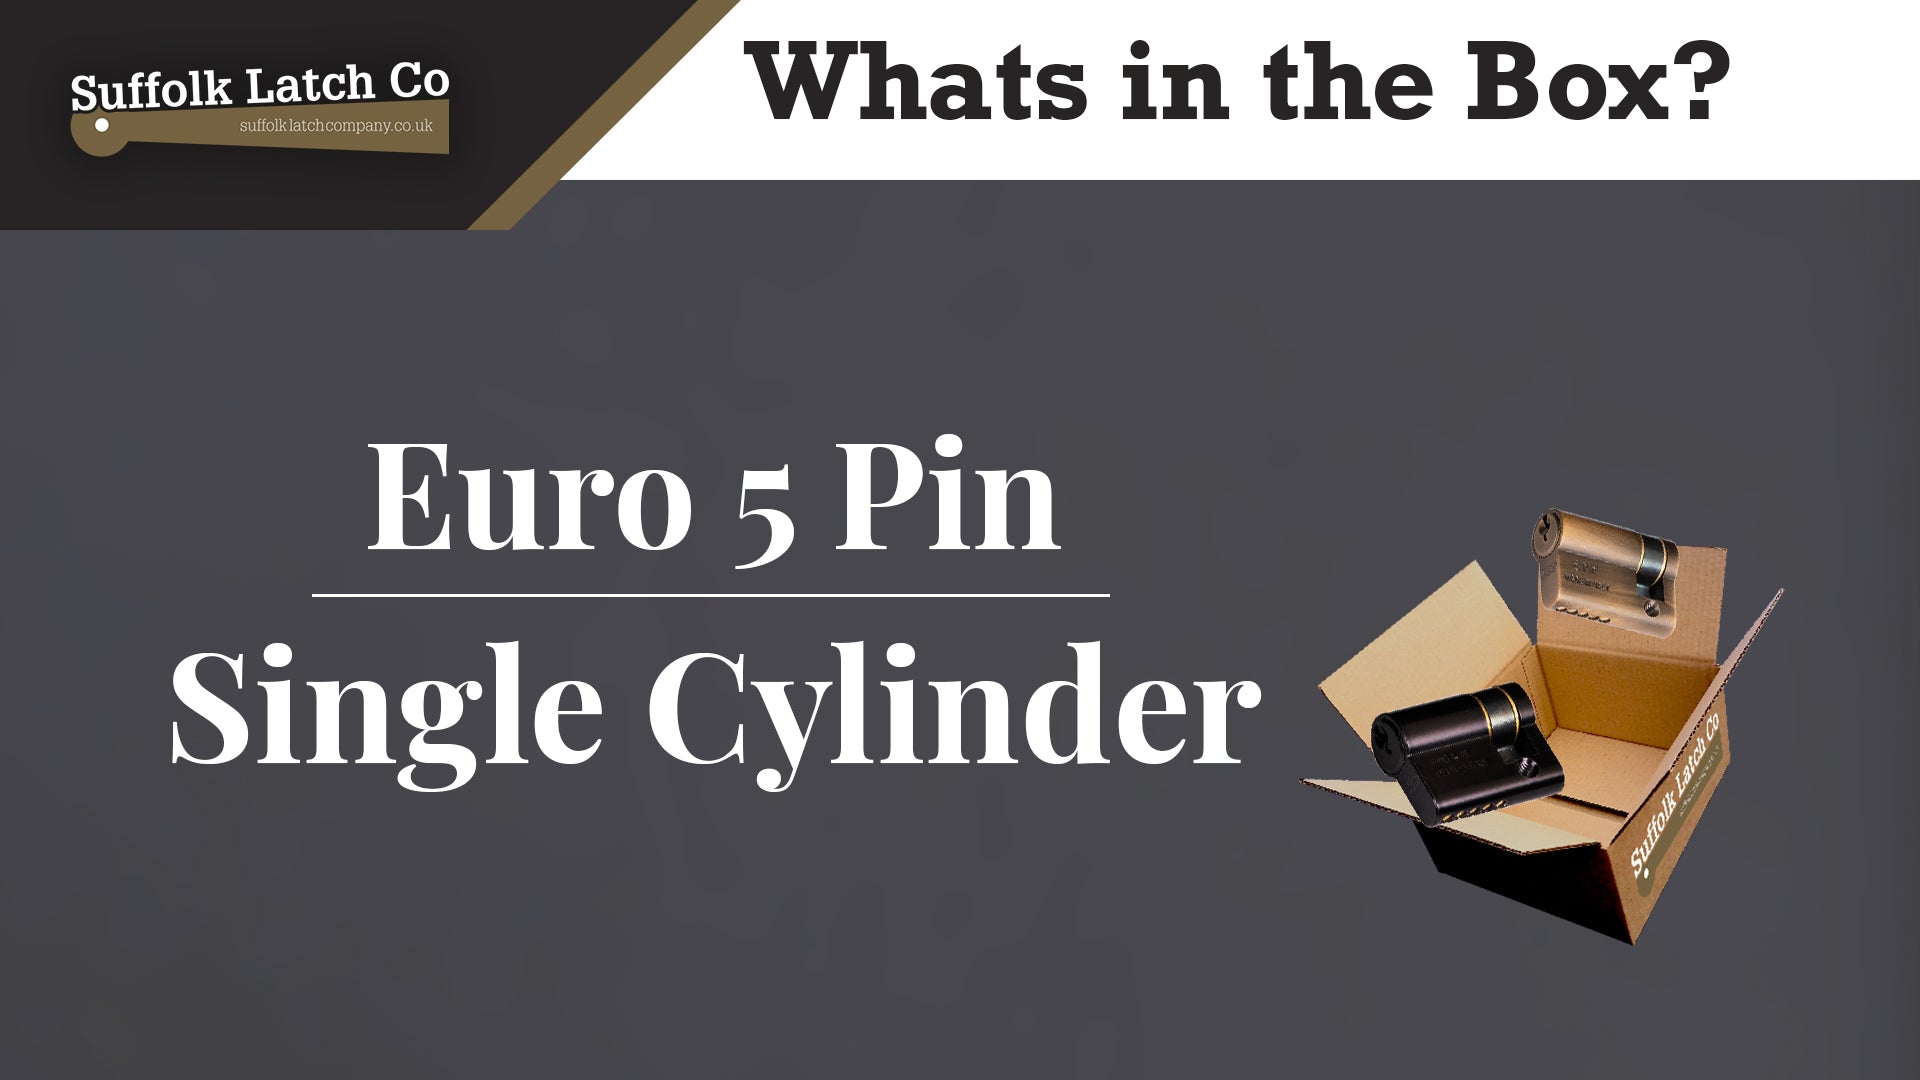 What's in the Box: Euro 5 Pin Single Cylinder